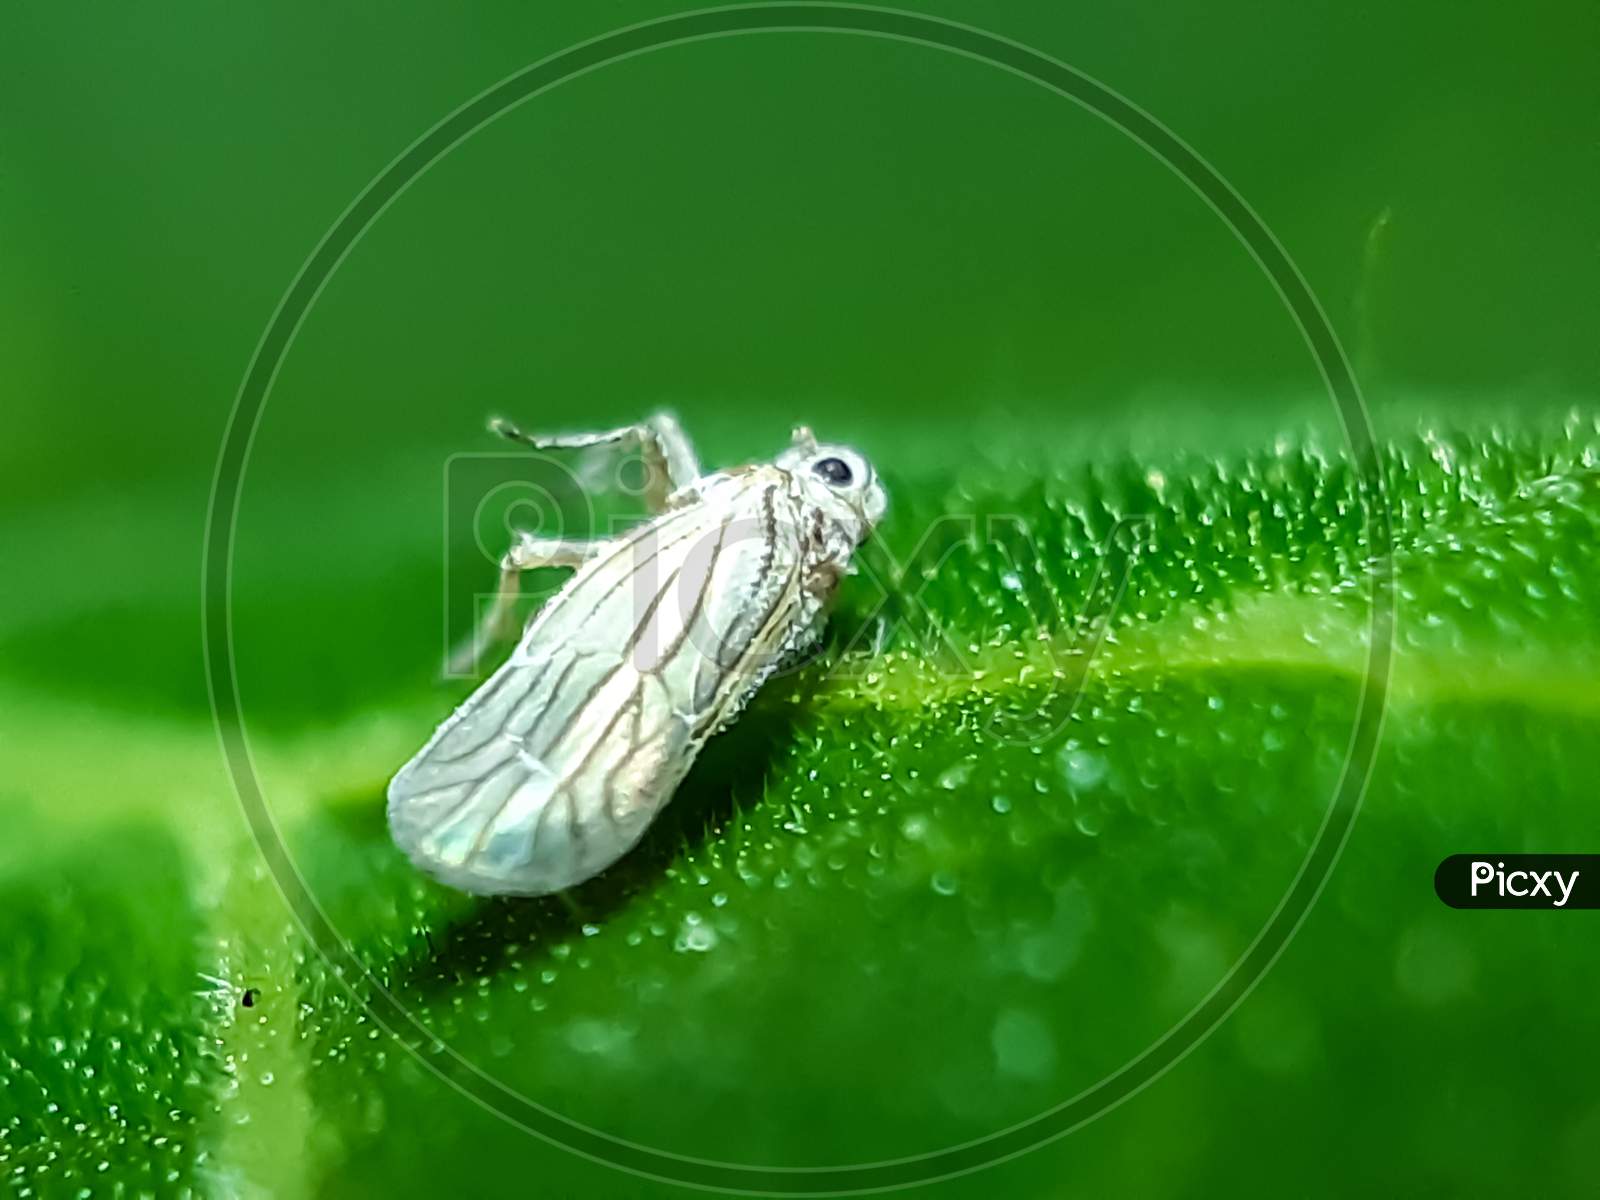 There Is A White Insect Dead On The Green Leaves And A Green Background.